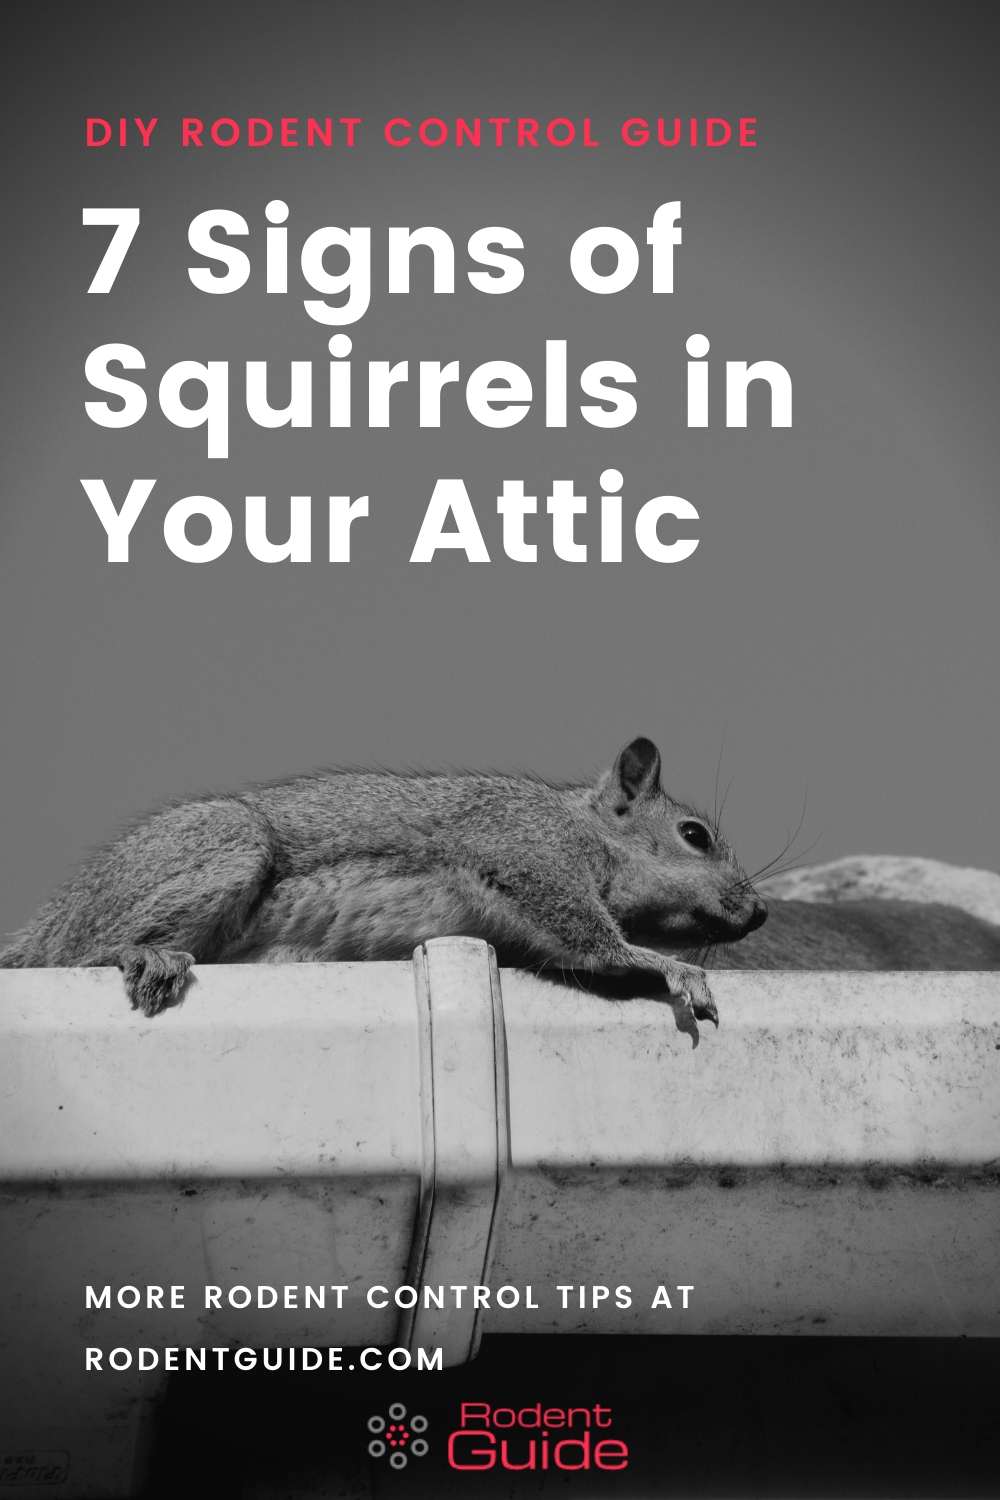 7 Signs of Squirrels in Your Attic